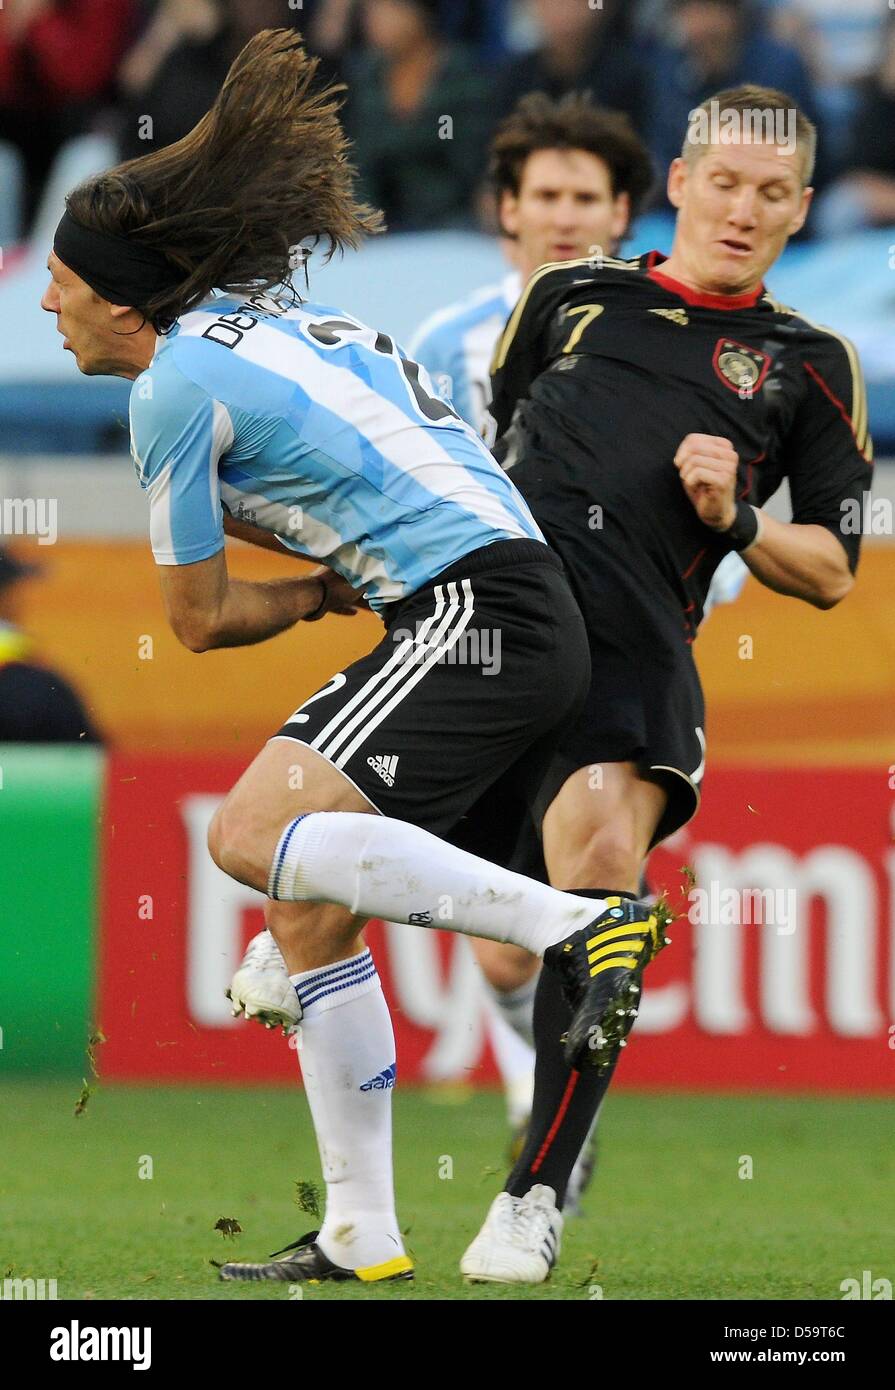 Germany's Bastian Schweinsteiger (R) vies for the ball with Argentina's Martin Demichelis during the 2010 FIFA World Cup quarterfinal match between Argentina and Germany at the Green Point Stadium in Cape Town, South Africa 03 July 2010. Photo: Marcus Brandt dpa - Please refer to http://dpaq.de/FIFA-WM2010-TC  +++(c) dpa - Bildfunk+++ Stock Photo